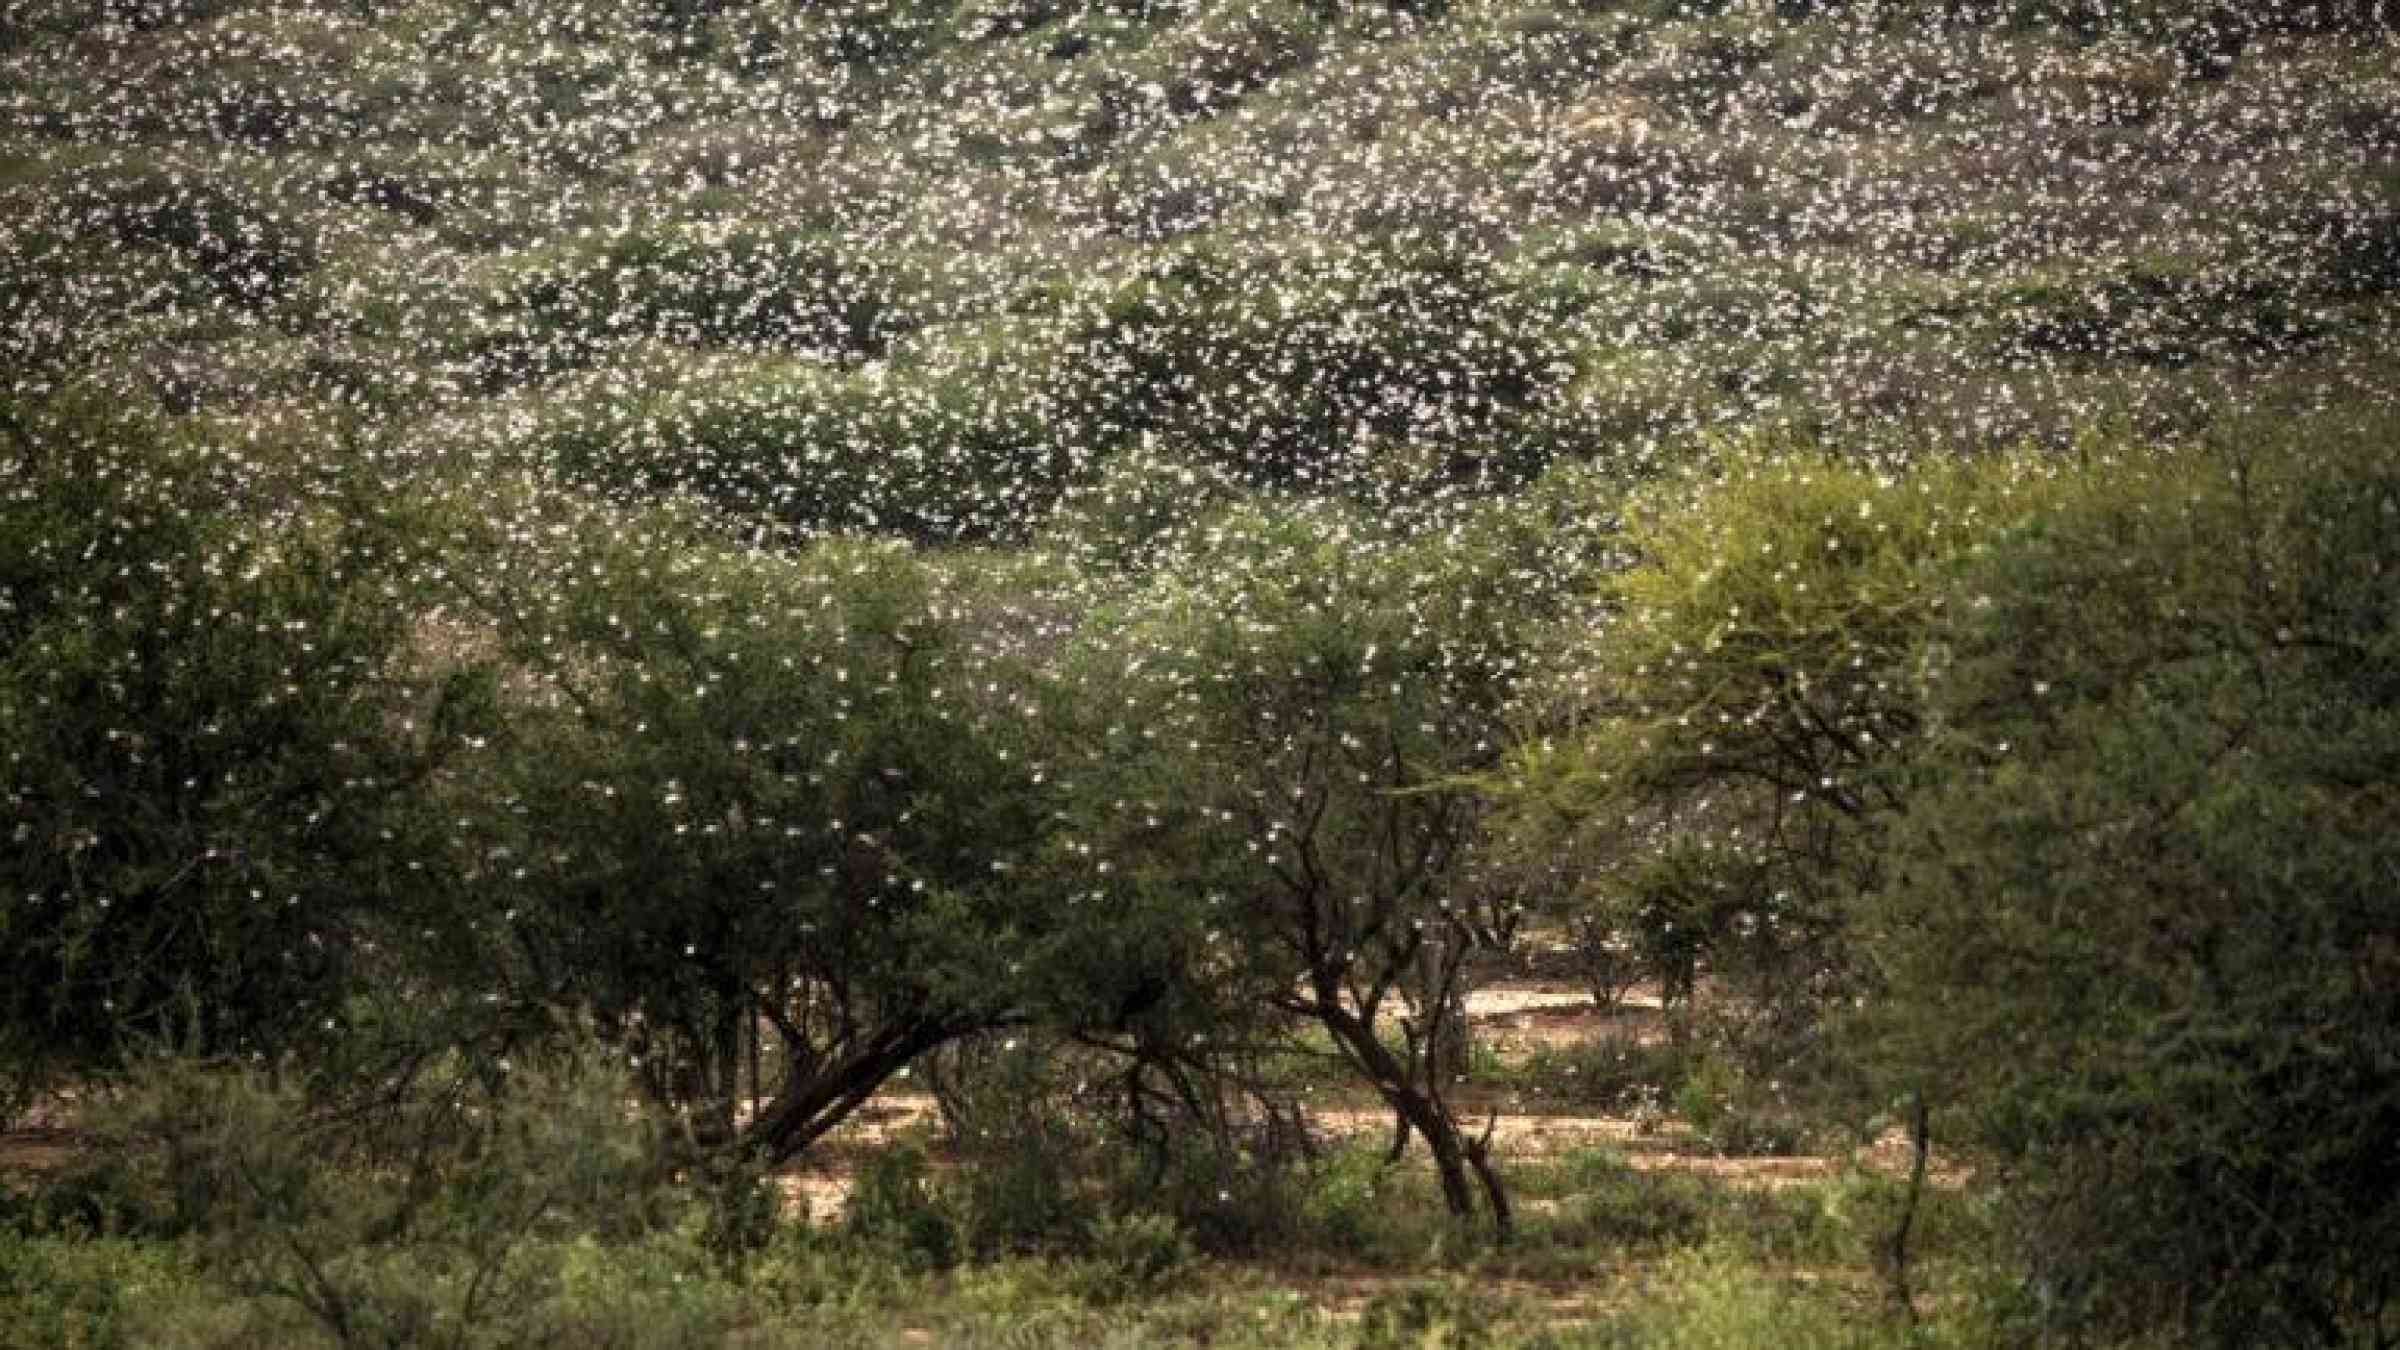 Desert locust swarm in a forested area in eastern Africa. Photo by Sven Torfinn/FAO.